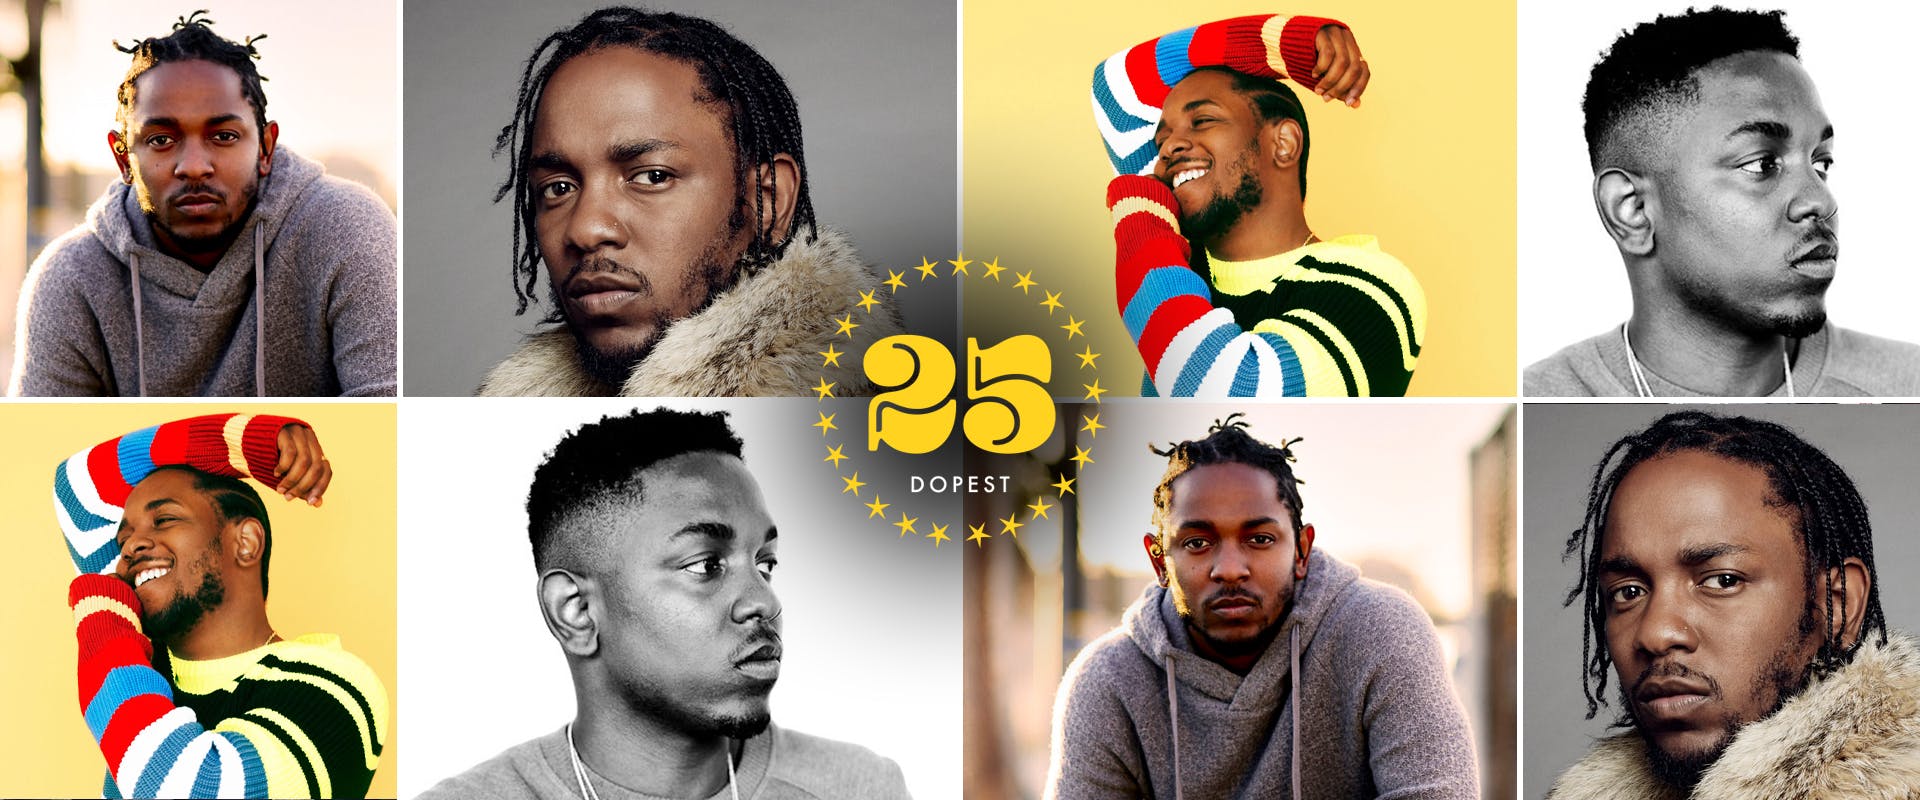 Kendrick Lamar: What's a King to a God?